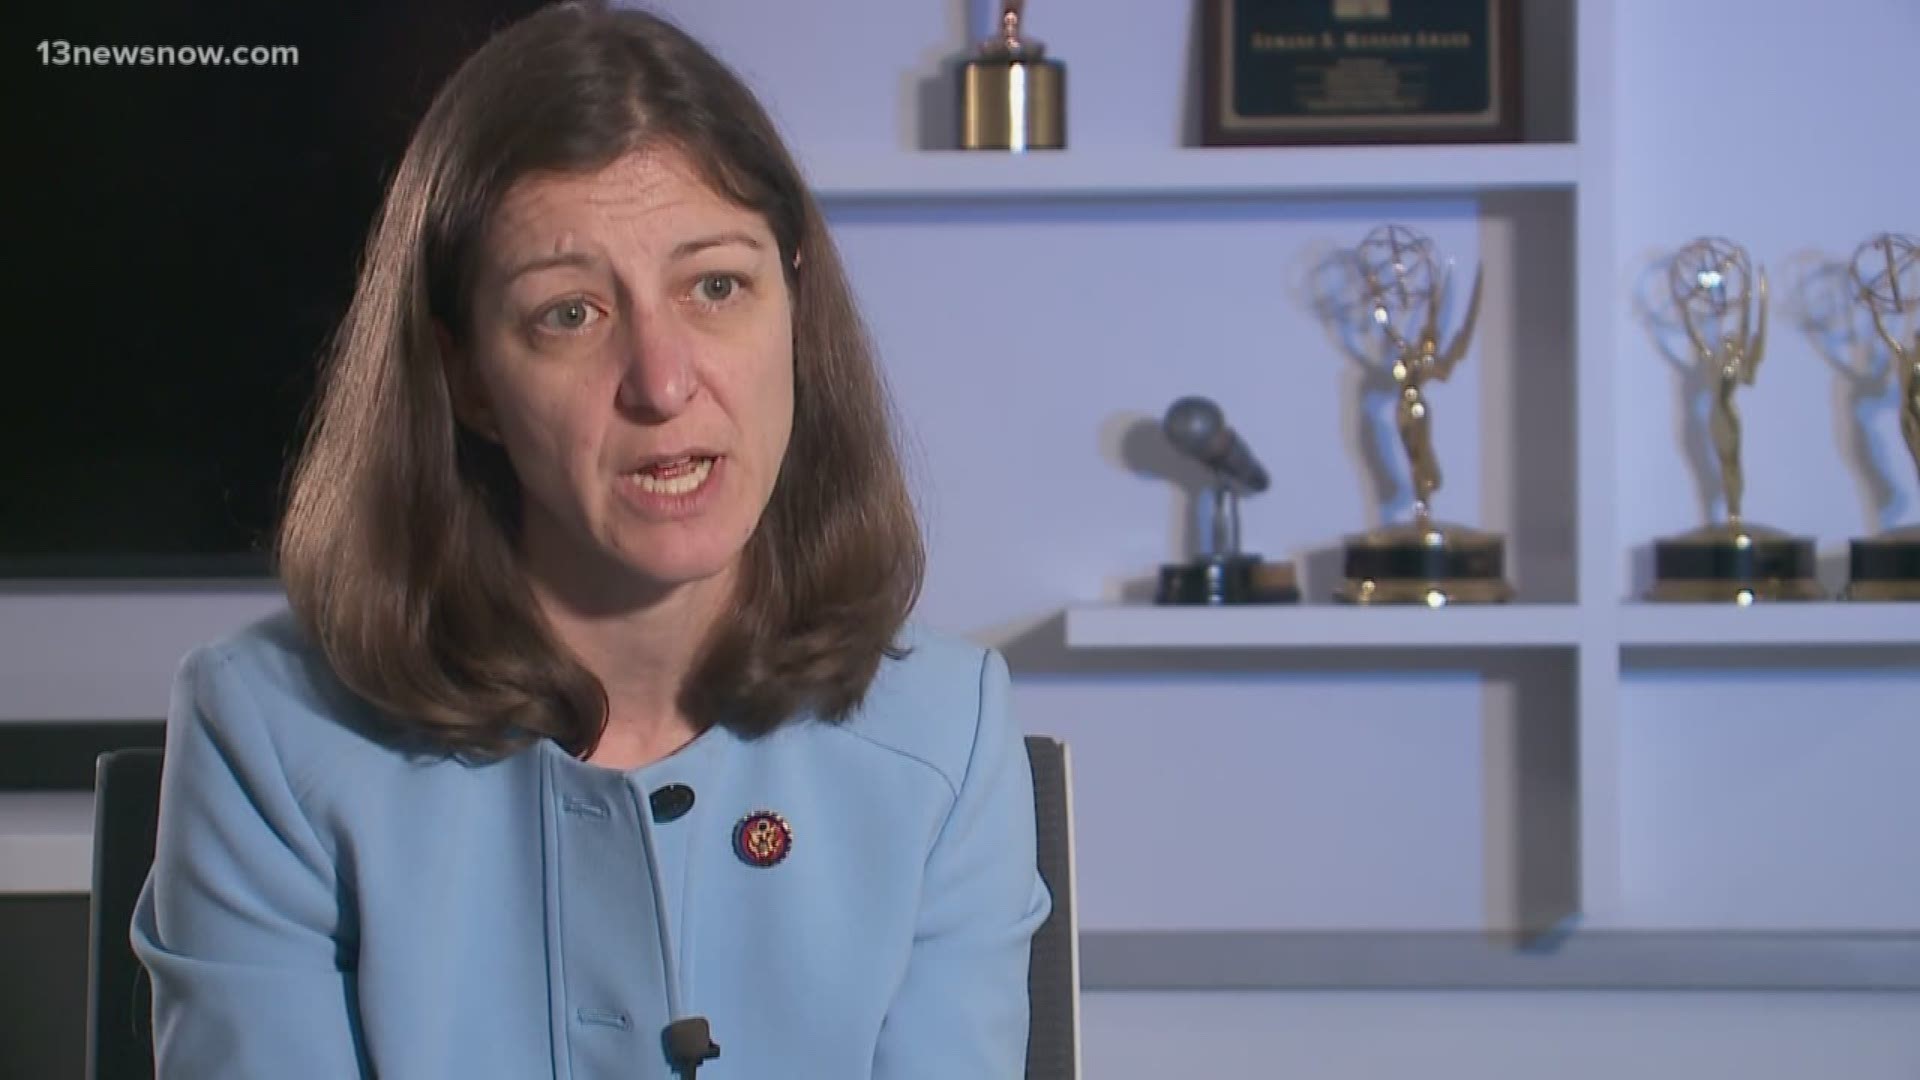 Second District Congresswoman Elaine Luria has some strong opinions about President Trump's decision to declare a national emergency in order to build a wall along the U.S. Mexico border.